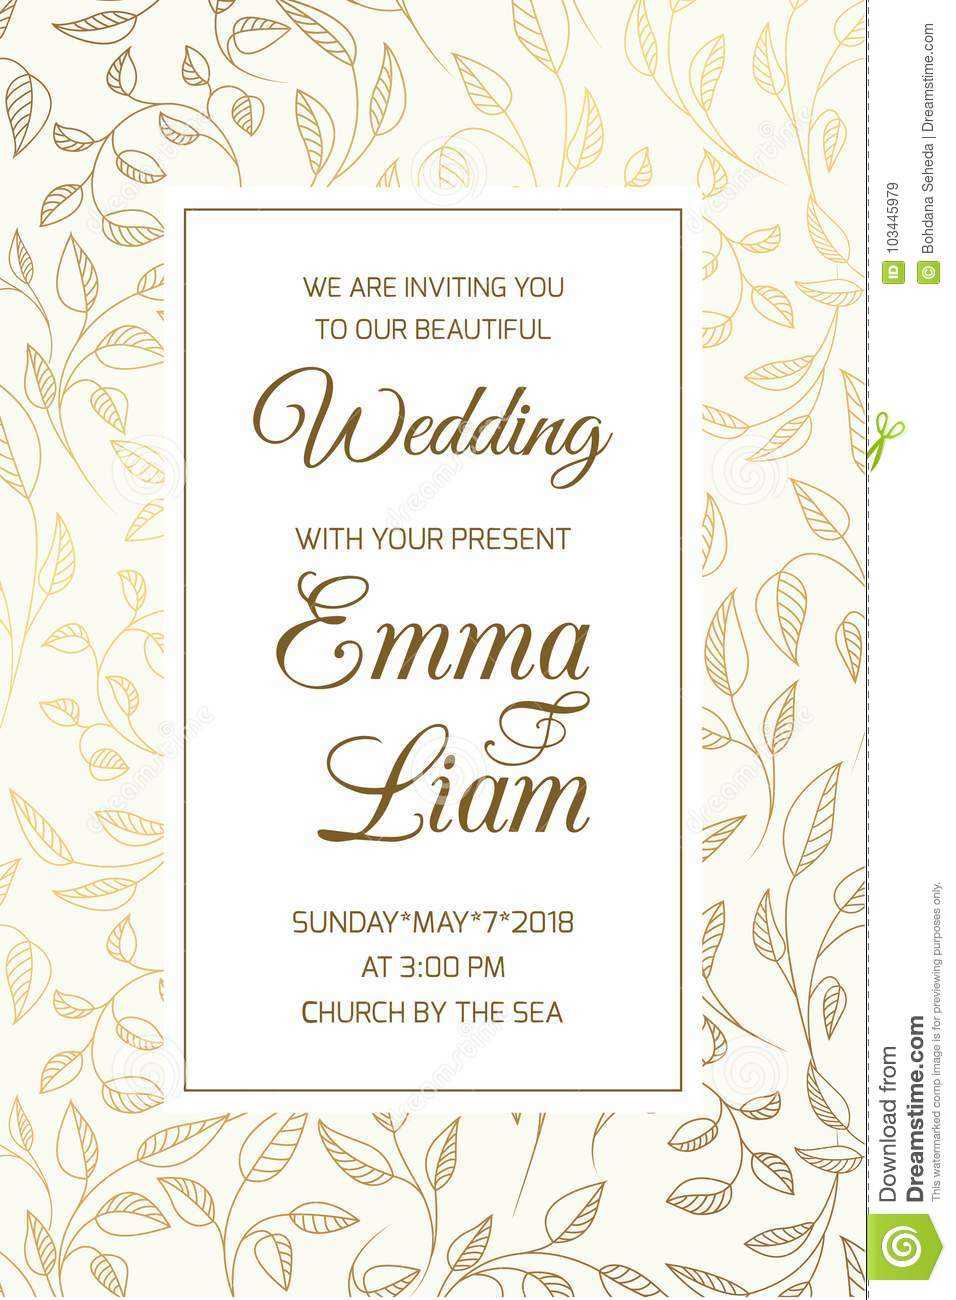 Wedding Invitation Card Template Swirl Leaves Gold Stock With Free Printable Wedding Rsvp Card Templates